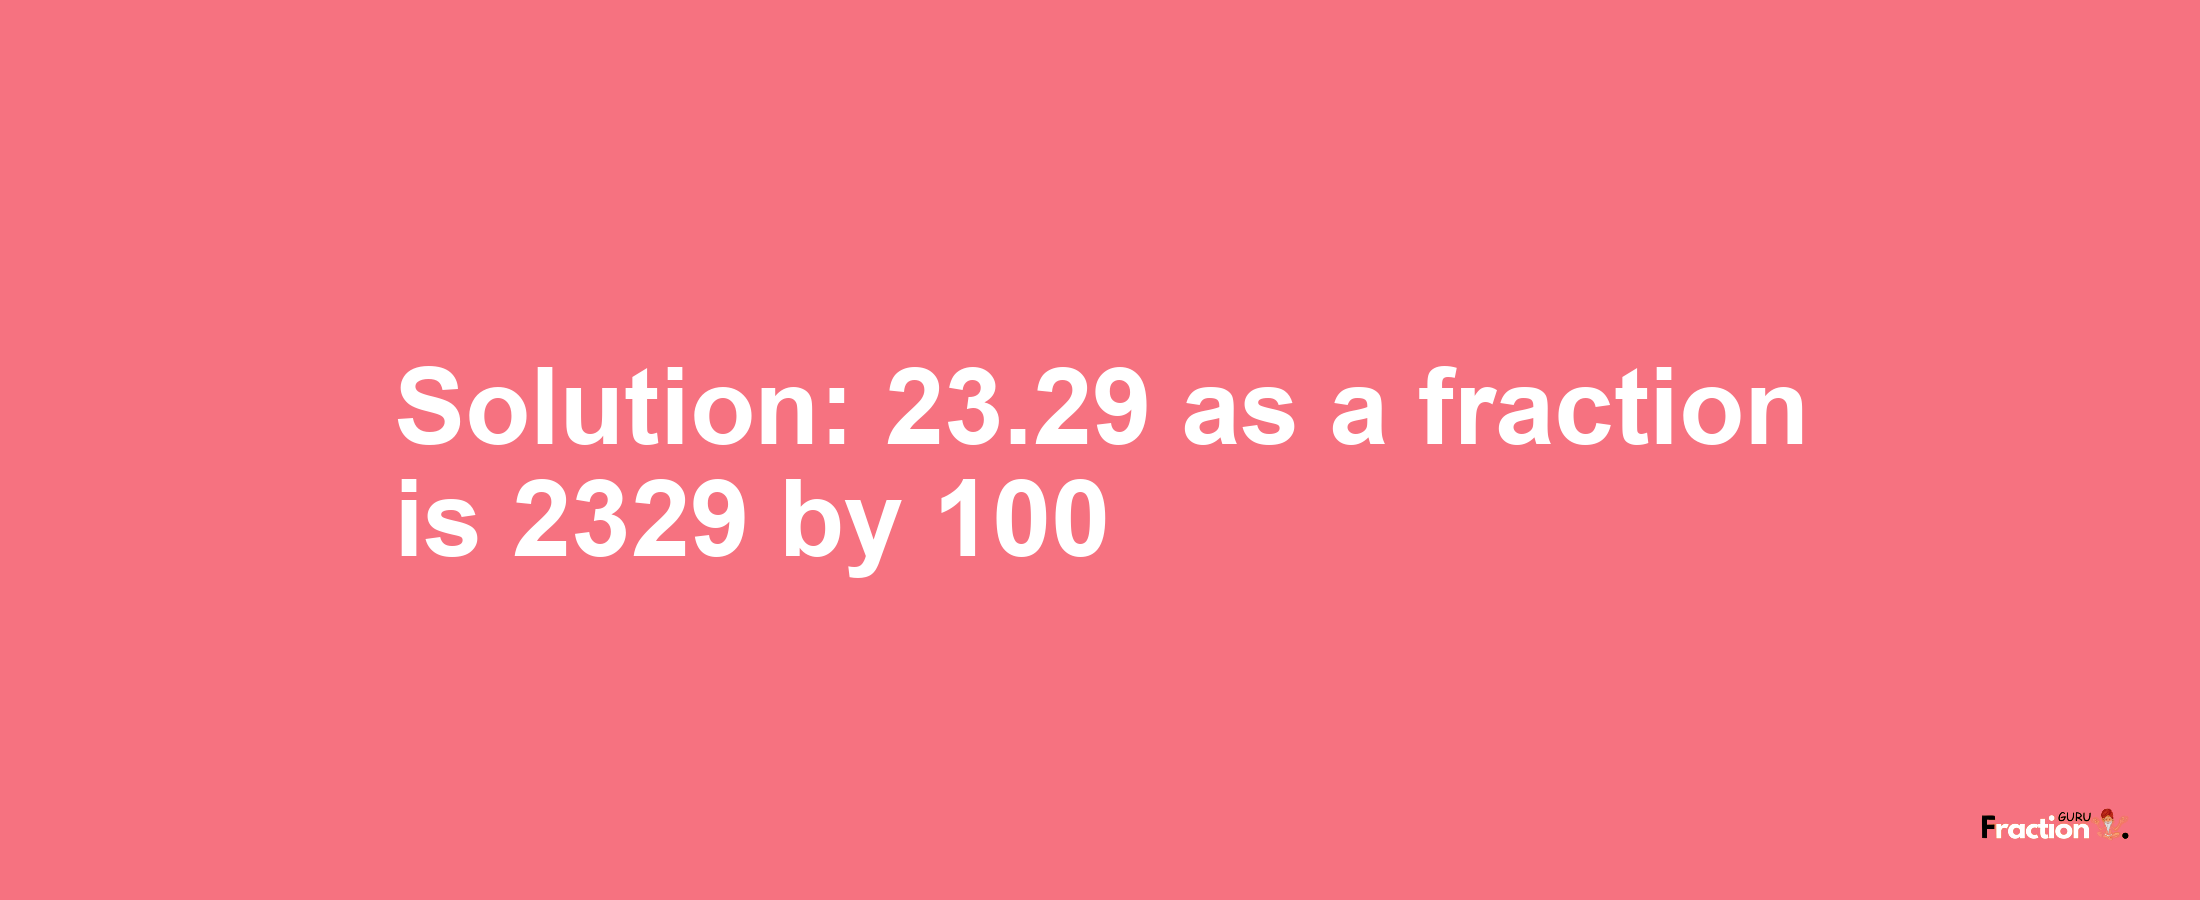 Solution:23.29 as a fraction is 2329/100